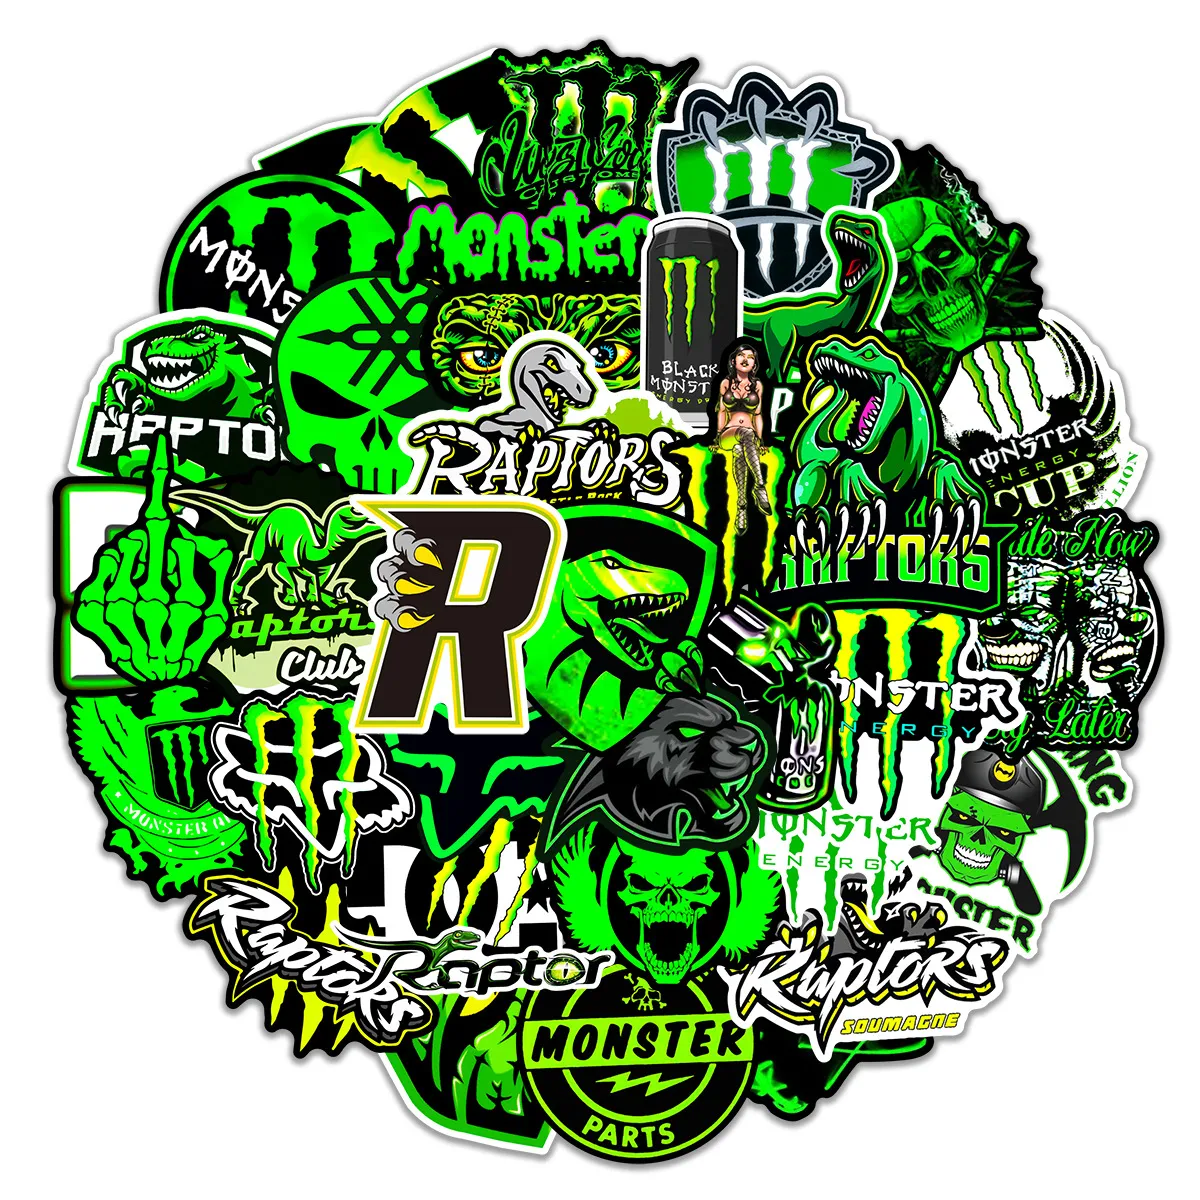 50 Green Fluorescent Monster Hunter Personality Trend Green Stickers For  Skateboards, Cars, Motorcycles, And Bicycles From Animetravel, $1.47